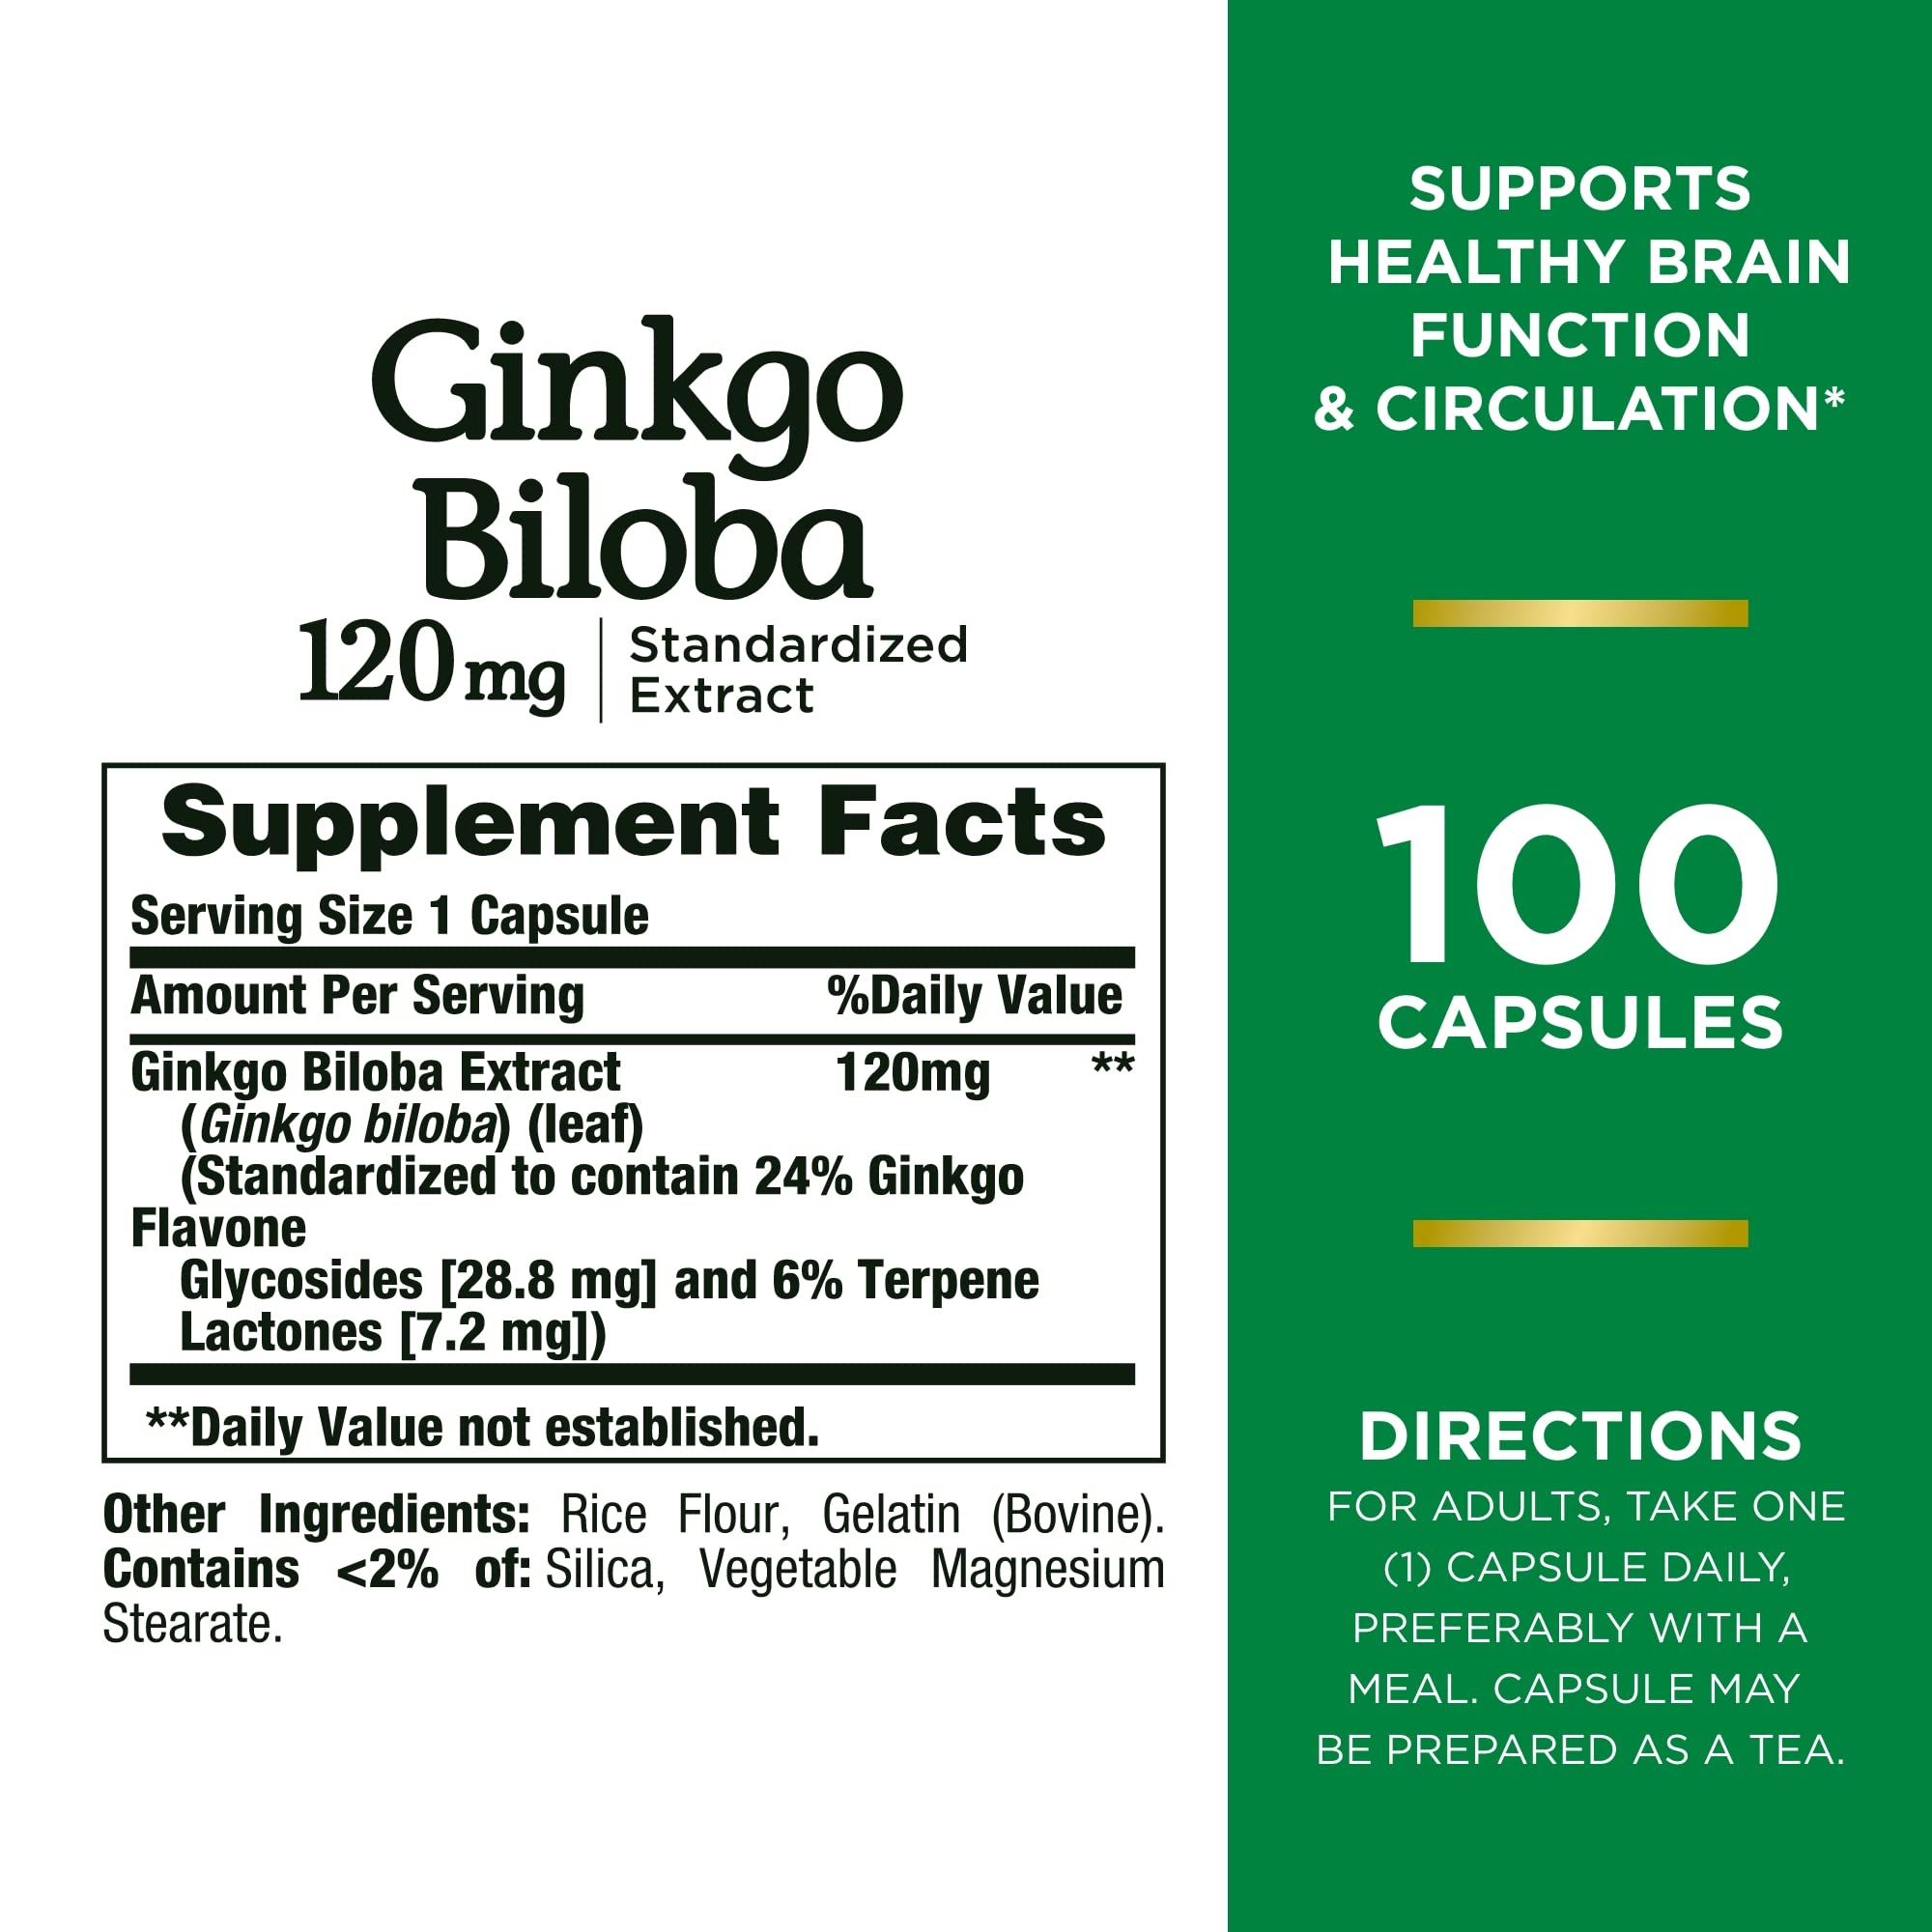 Nature’s Bounty Ginkgo Biloba Capsules 120mg, Memory Support Supplement, Supports Brain Function and Mental Alertness, 100 Capsules